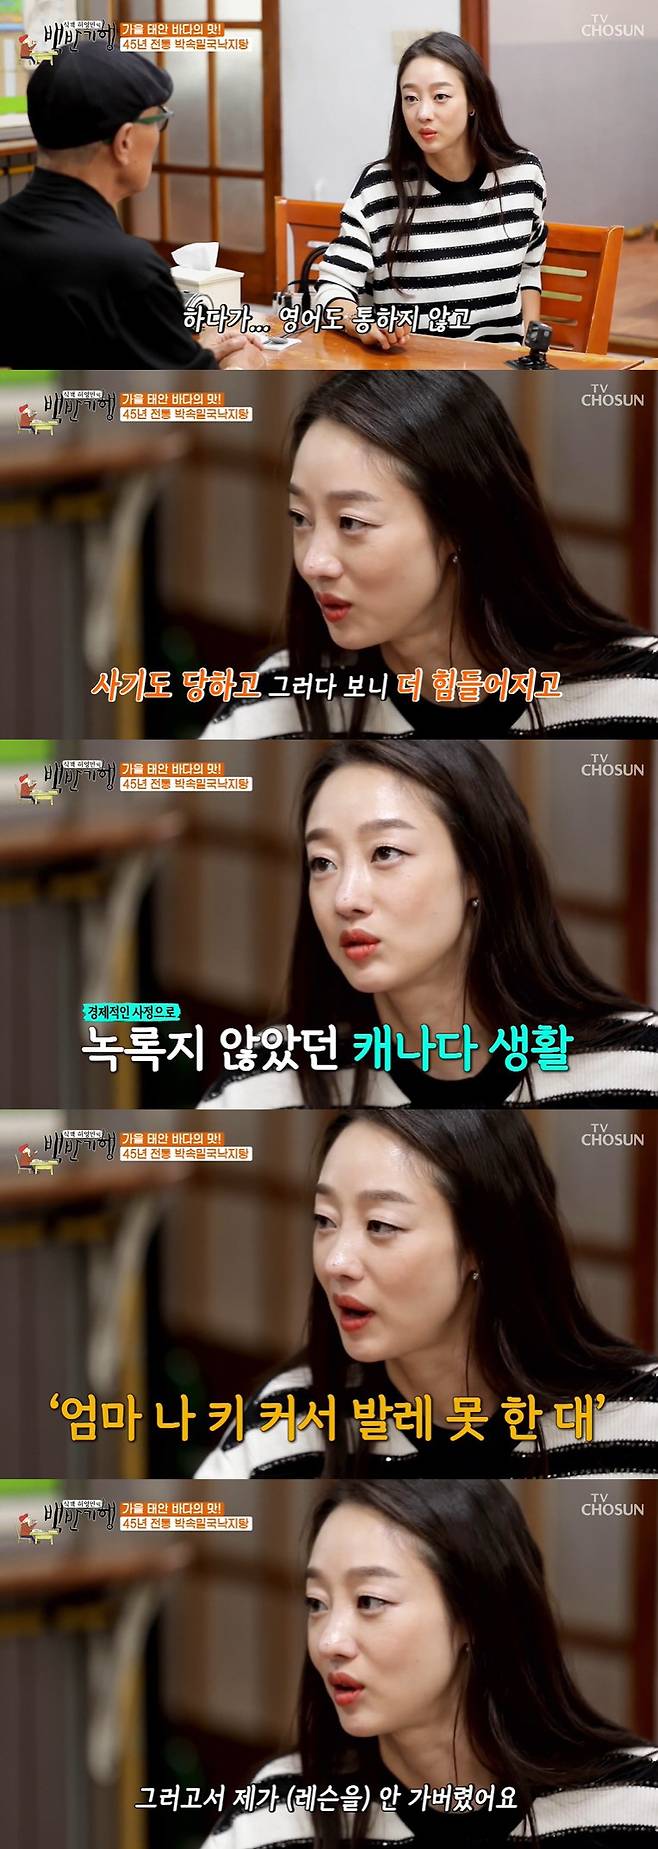 White Half Travel Choi Yeo-jin told Canada why he had to go to Vallejo.Actor Choi Yeo-jin visited Taean restaurant on the 5th TV Chosun Huh Young-mans White Travel.Choi Yeo-jins first destination was the Parksokmukguk octopus. Choi Yeo-jin, who lived in Canada, actually saw Park for the first time.Huh Young-man asked why he went to Canada and Choi Yeo-jin said: I did dance.I was worried about the economic part, so I wanted to go abroad and study and get better. Huh Young-man wondered, Do not you go abroad? Choi Yeo-jin said, Even when I was a child, my perception of the divorce family was not as open as it is now.I also had The Complex, so I thought it would be better if I went there. Choi Yeo-jin, who has been playing Vallejo since fifth grade in elementary school, but had to quit Vallejo because of the cost of his school.Choi Yeo-jin said: The English language didnt work, and the Records of the Grand Historian got even harder.I was pushed out of school and stressed out about my lessons, so I finally told my mom, I cant be Vallejo because Im tall. And I didnt go to lessons. The dream of dance was achieved instead through MBC entertainment program Dancing With the Star.Choi Yeo-jin said, I had a sadness about my dream that I could not have done, but I have a lot of attachment because Dancing With the Star is a program that was satisfied with the agency.Choi Yeo-jin said that the main house is in Cheongdam-dong, but mainly stays at the Cheongshim International Academy to stem water leisure.Choi Yeo-jin said he likes water skiing, wake surfing, as well as various exercises, and I like to dance with nature or dance with music.Choi Yeo-jin, who likes Kimchi enough to not eat rice without Kimchi in the table, said, My boyfriends mother, who was a lover, made Kimchi so delicious.I thought Id break up and call back, but I could not collapse in front of Kimchi. But I think about Kimchi. 